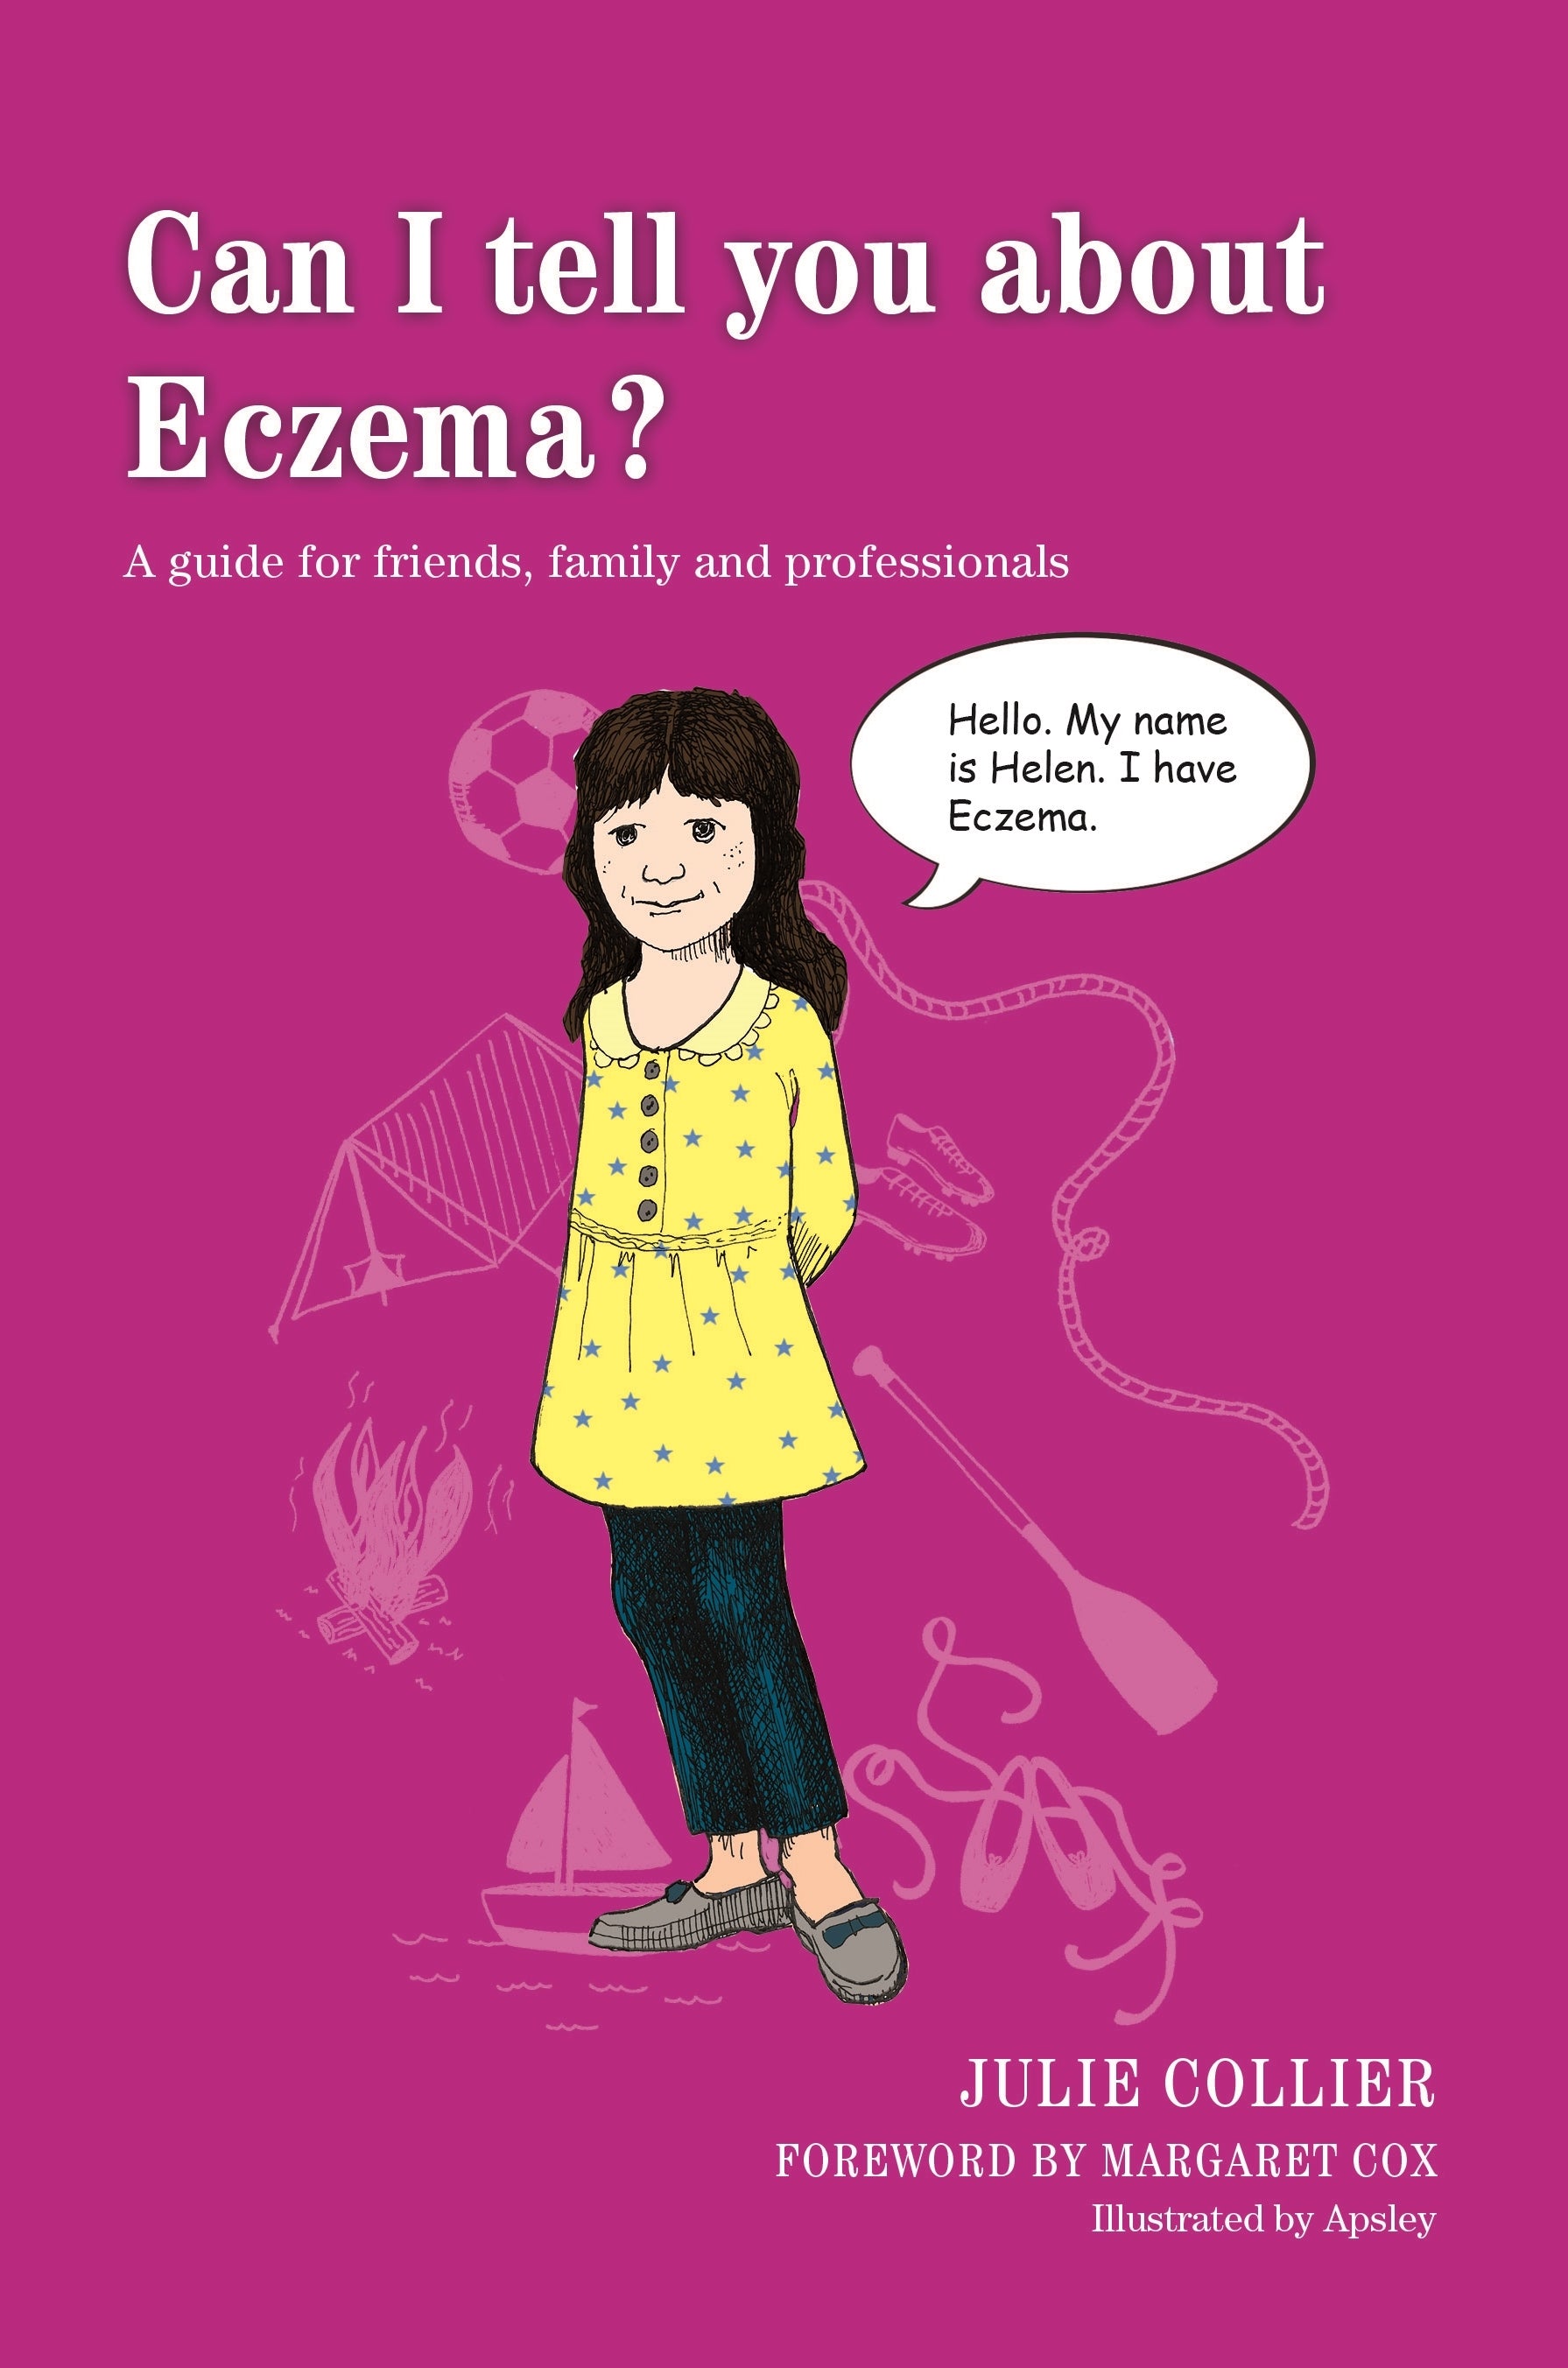 Can I tell you about Eczema? by Julie Collier, Margaret Cox,  Apsley